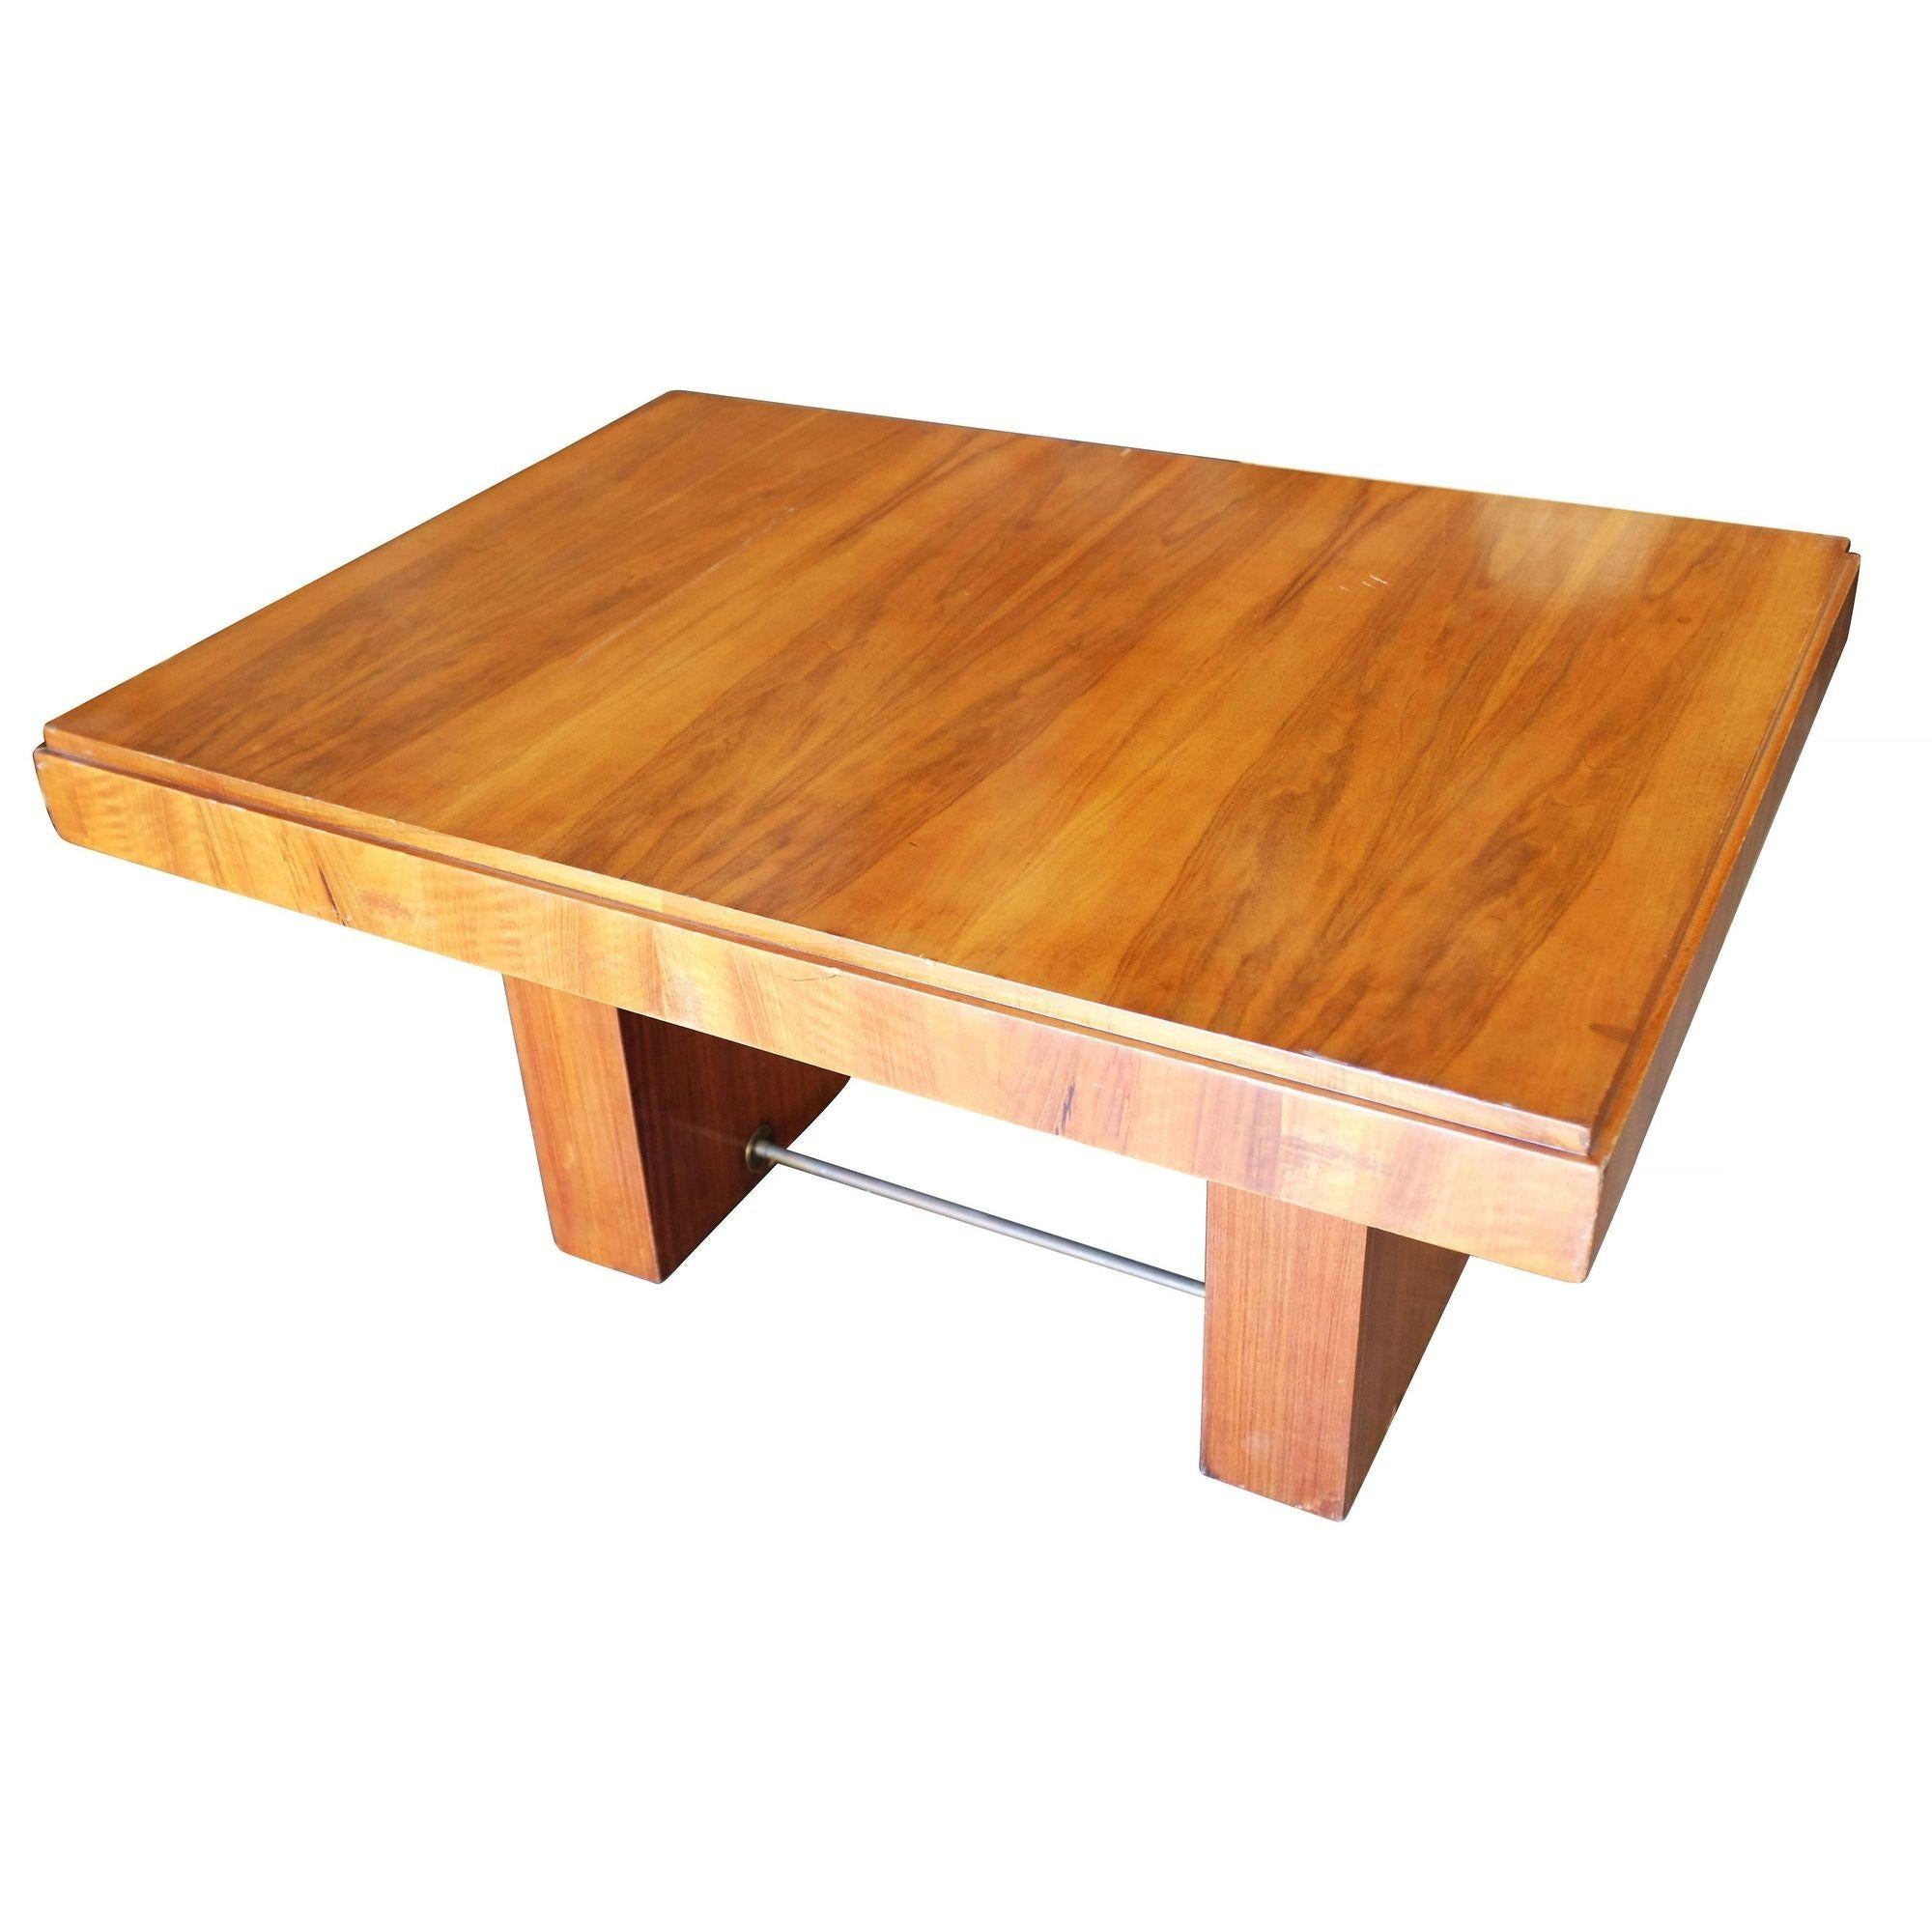 Late 20th Century Charles Dudouyt Cubist Inspired Walnut Desk / Dining Table For Sale